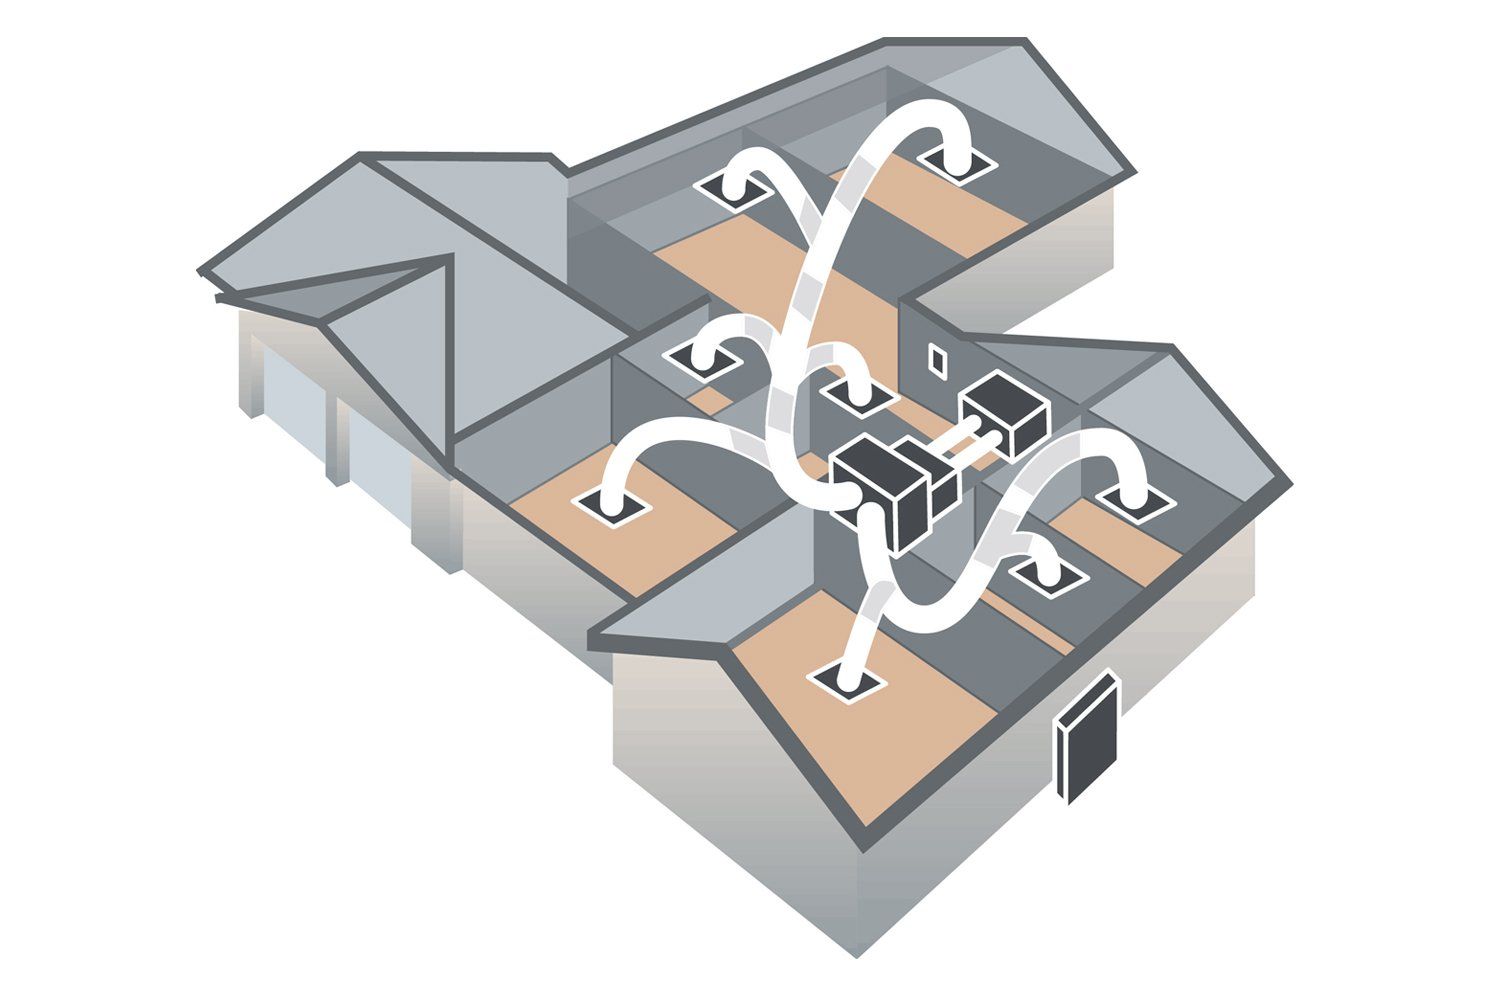 An image depicting our ducted heat pump systems in Launceston